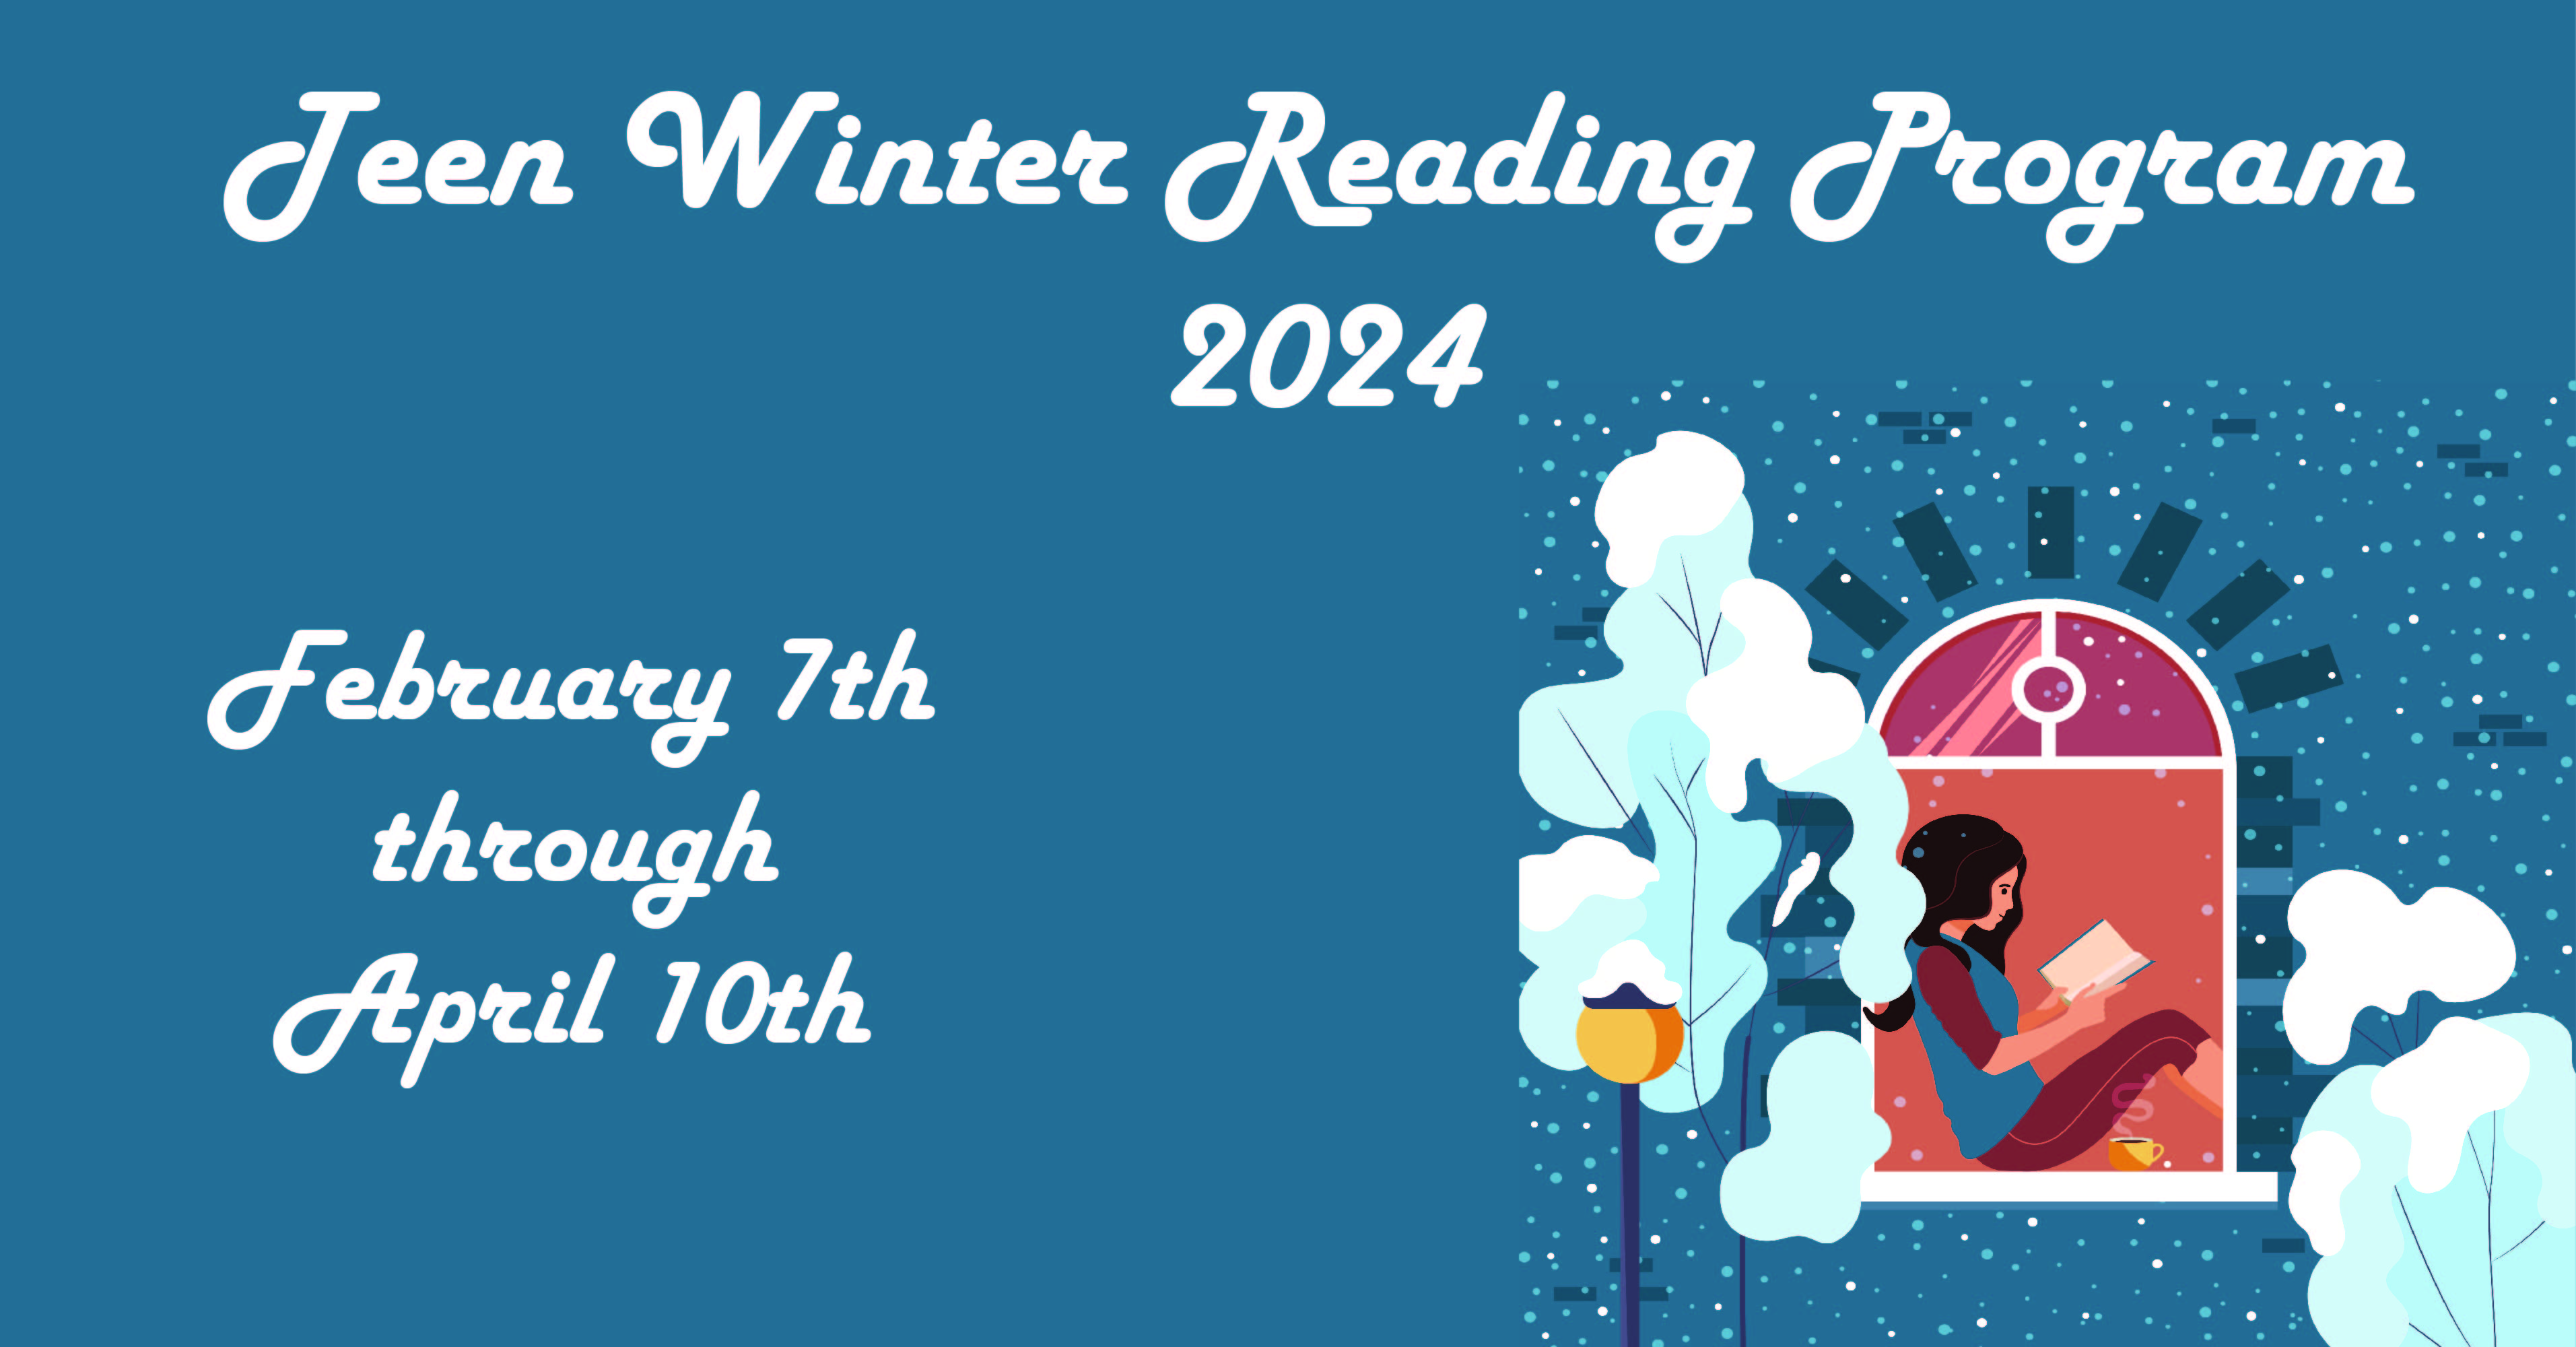 Winter Reading for teens